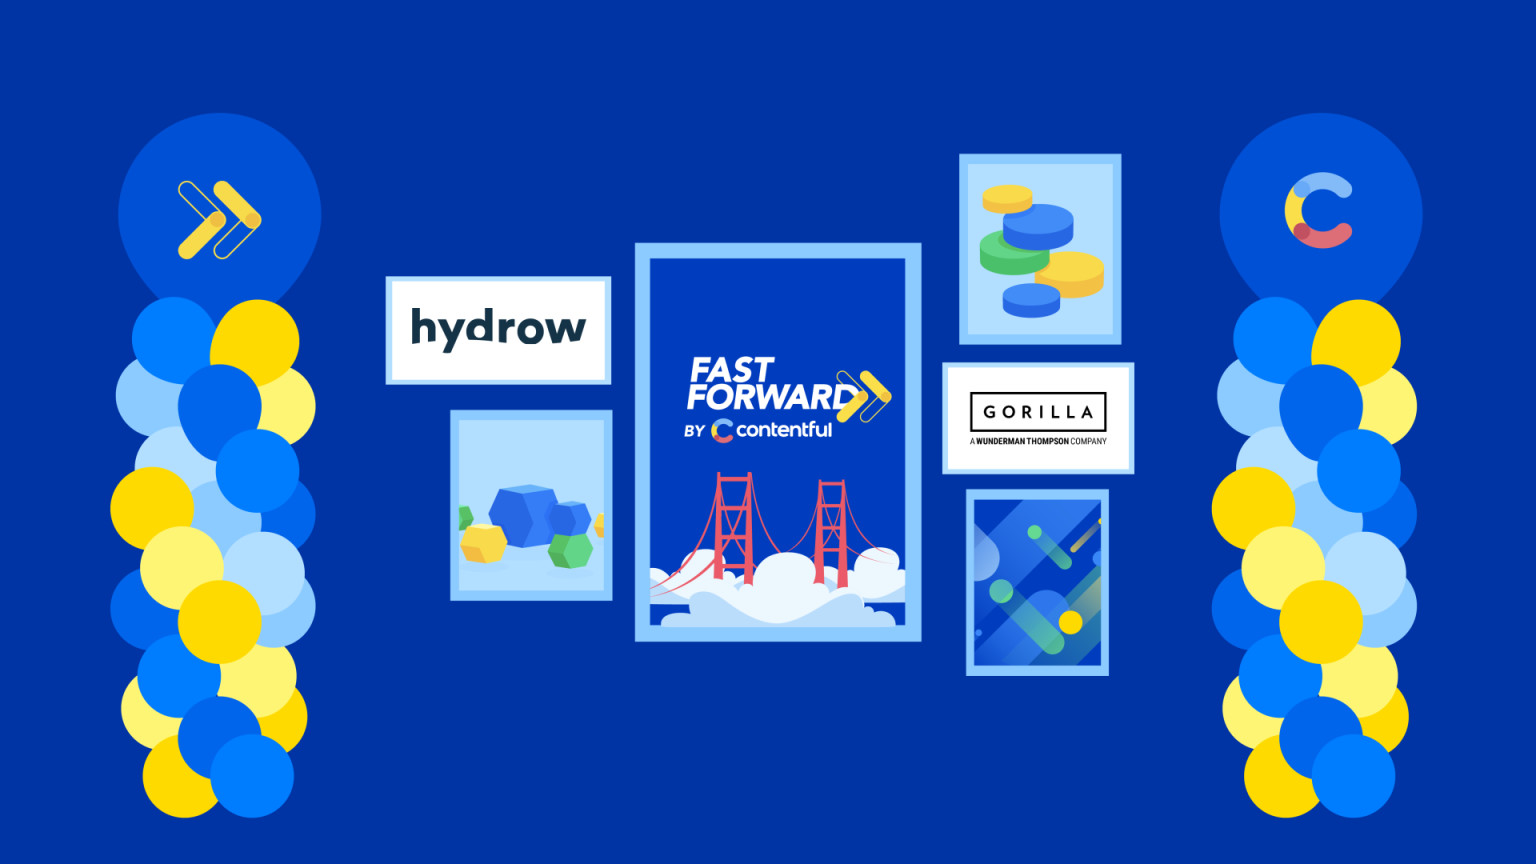 Fast Forward San Francisco was a golden gate to composable content, building a better brand and replatforming without sacrificing speed or reliability.